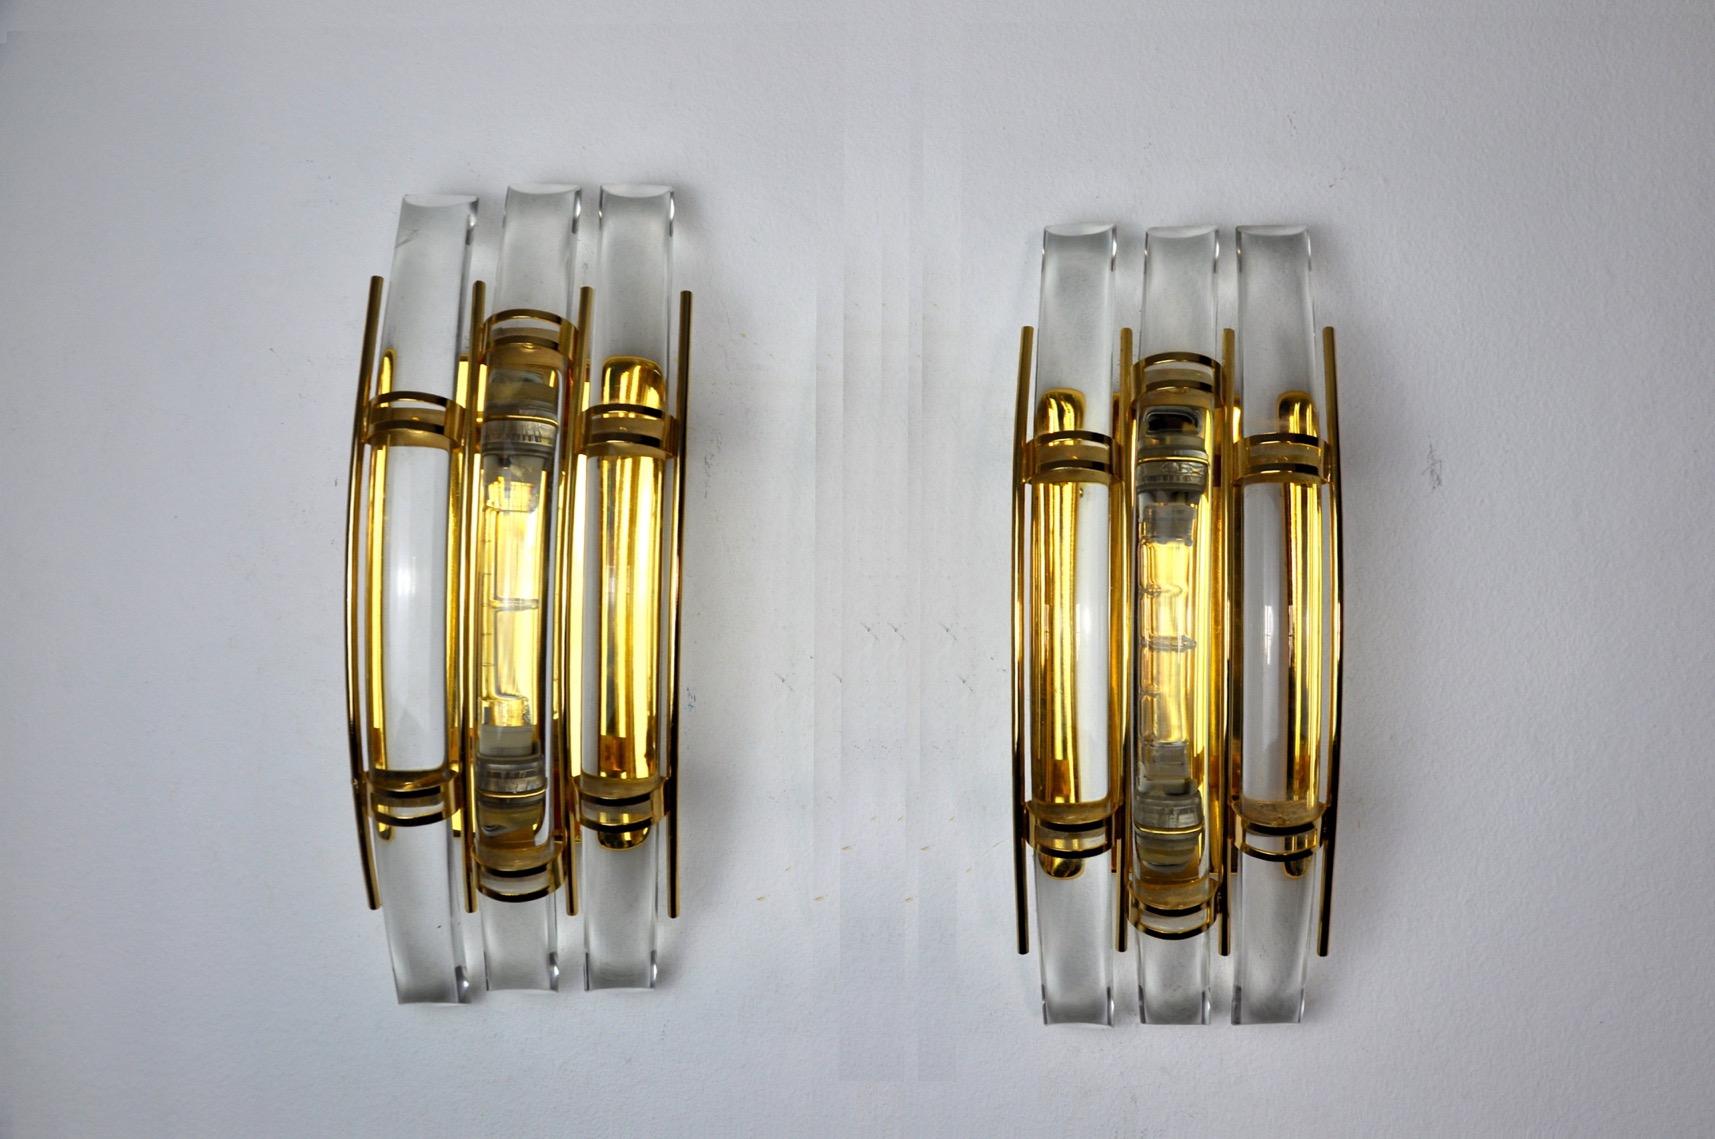 Very nice pair of venini wall lights produced in italy in the 70s. Cut glass and gilt metal structure. Unique object that will illuminate wonderfully and bring a real design touch to your interior. Electricity checked, mark of time consistent with